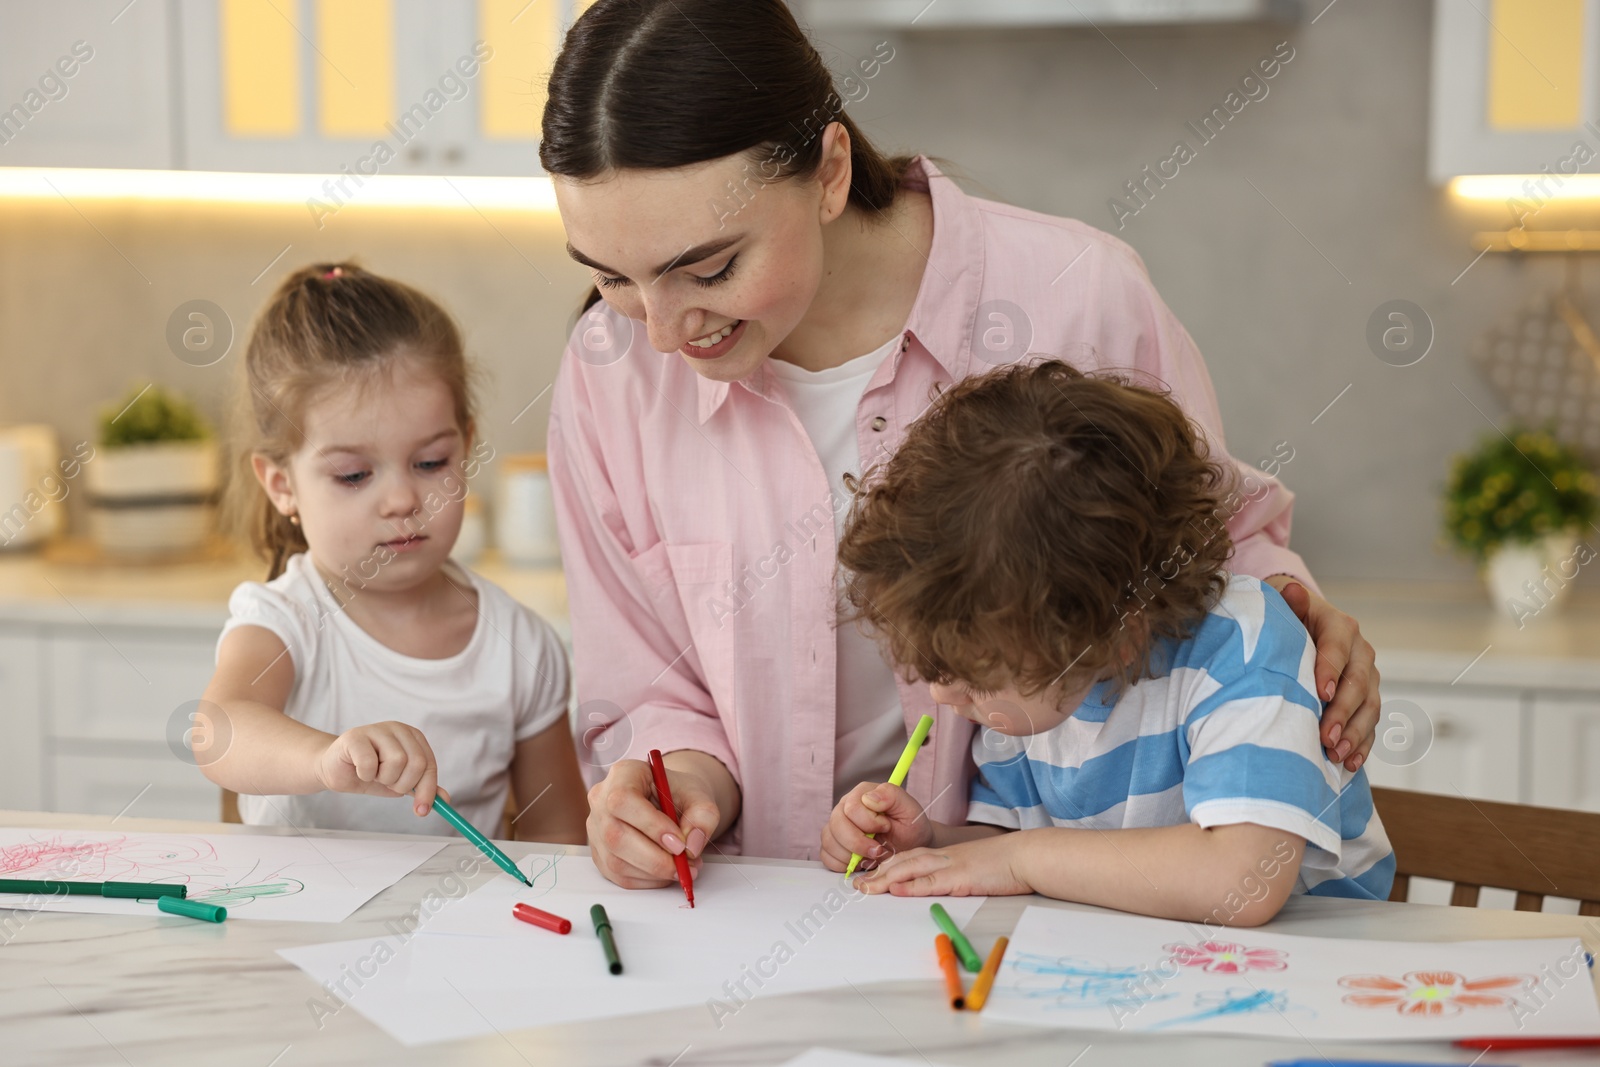 Photo of Mother and her little children drawing with colorful markers at table in kitchen